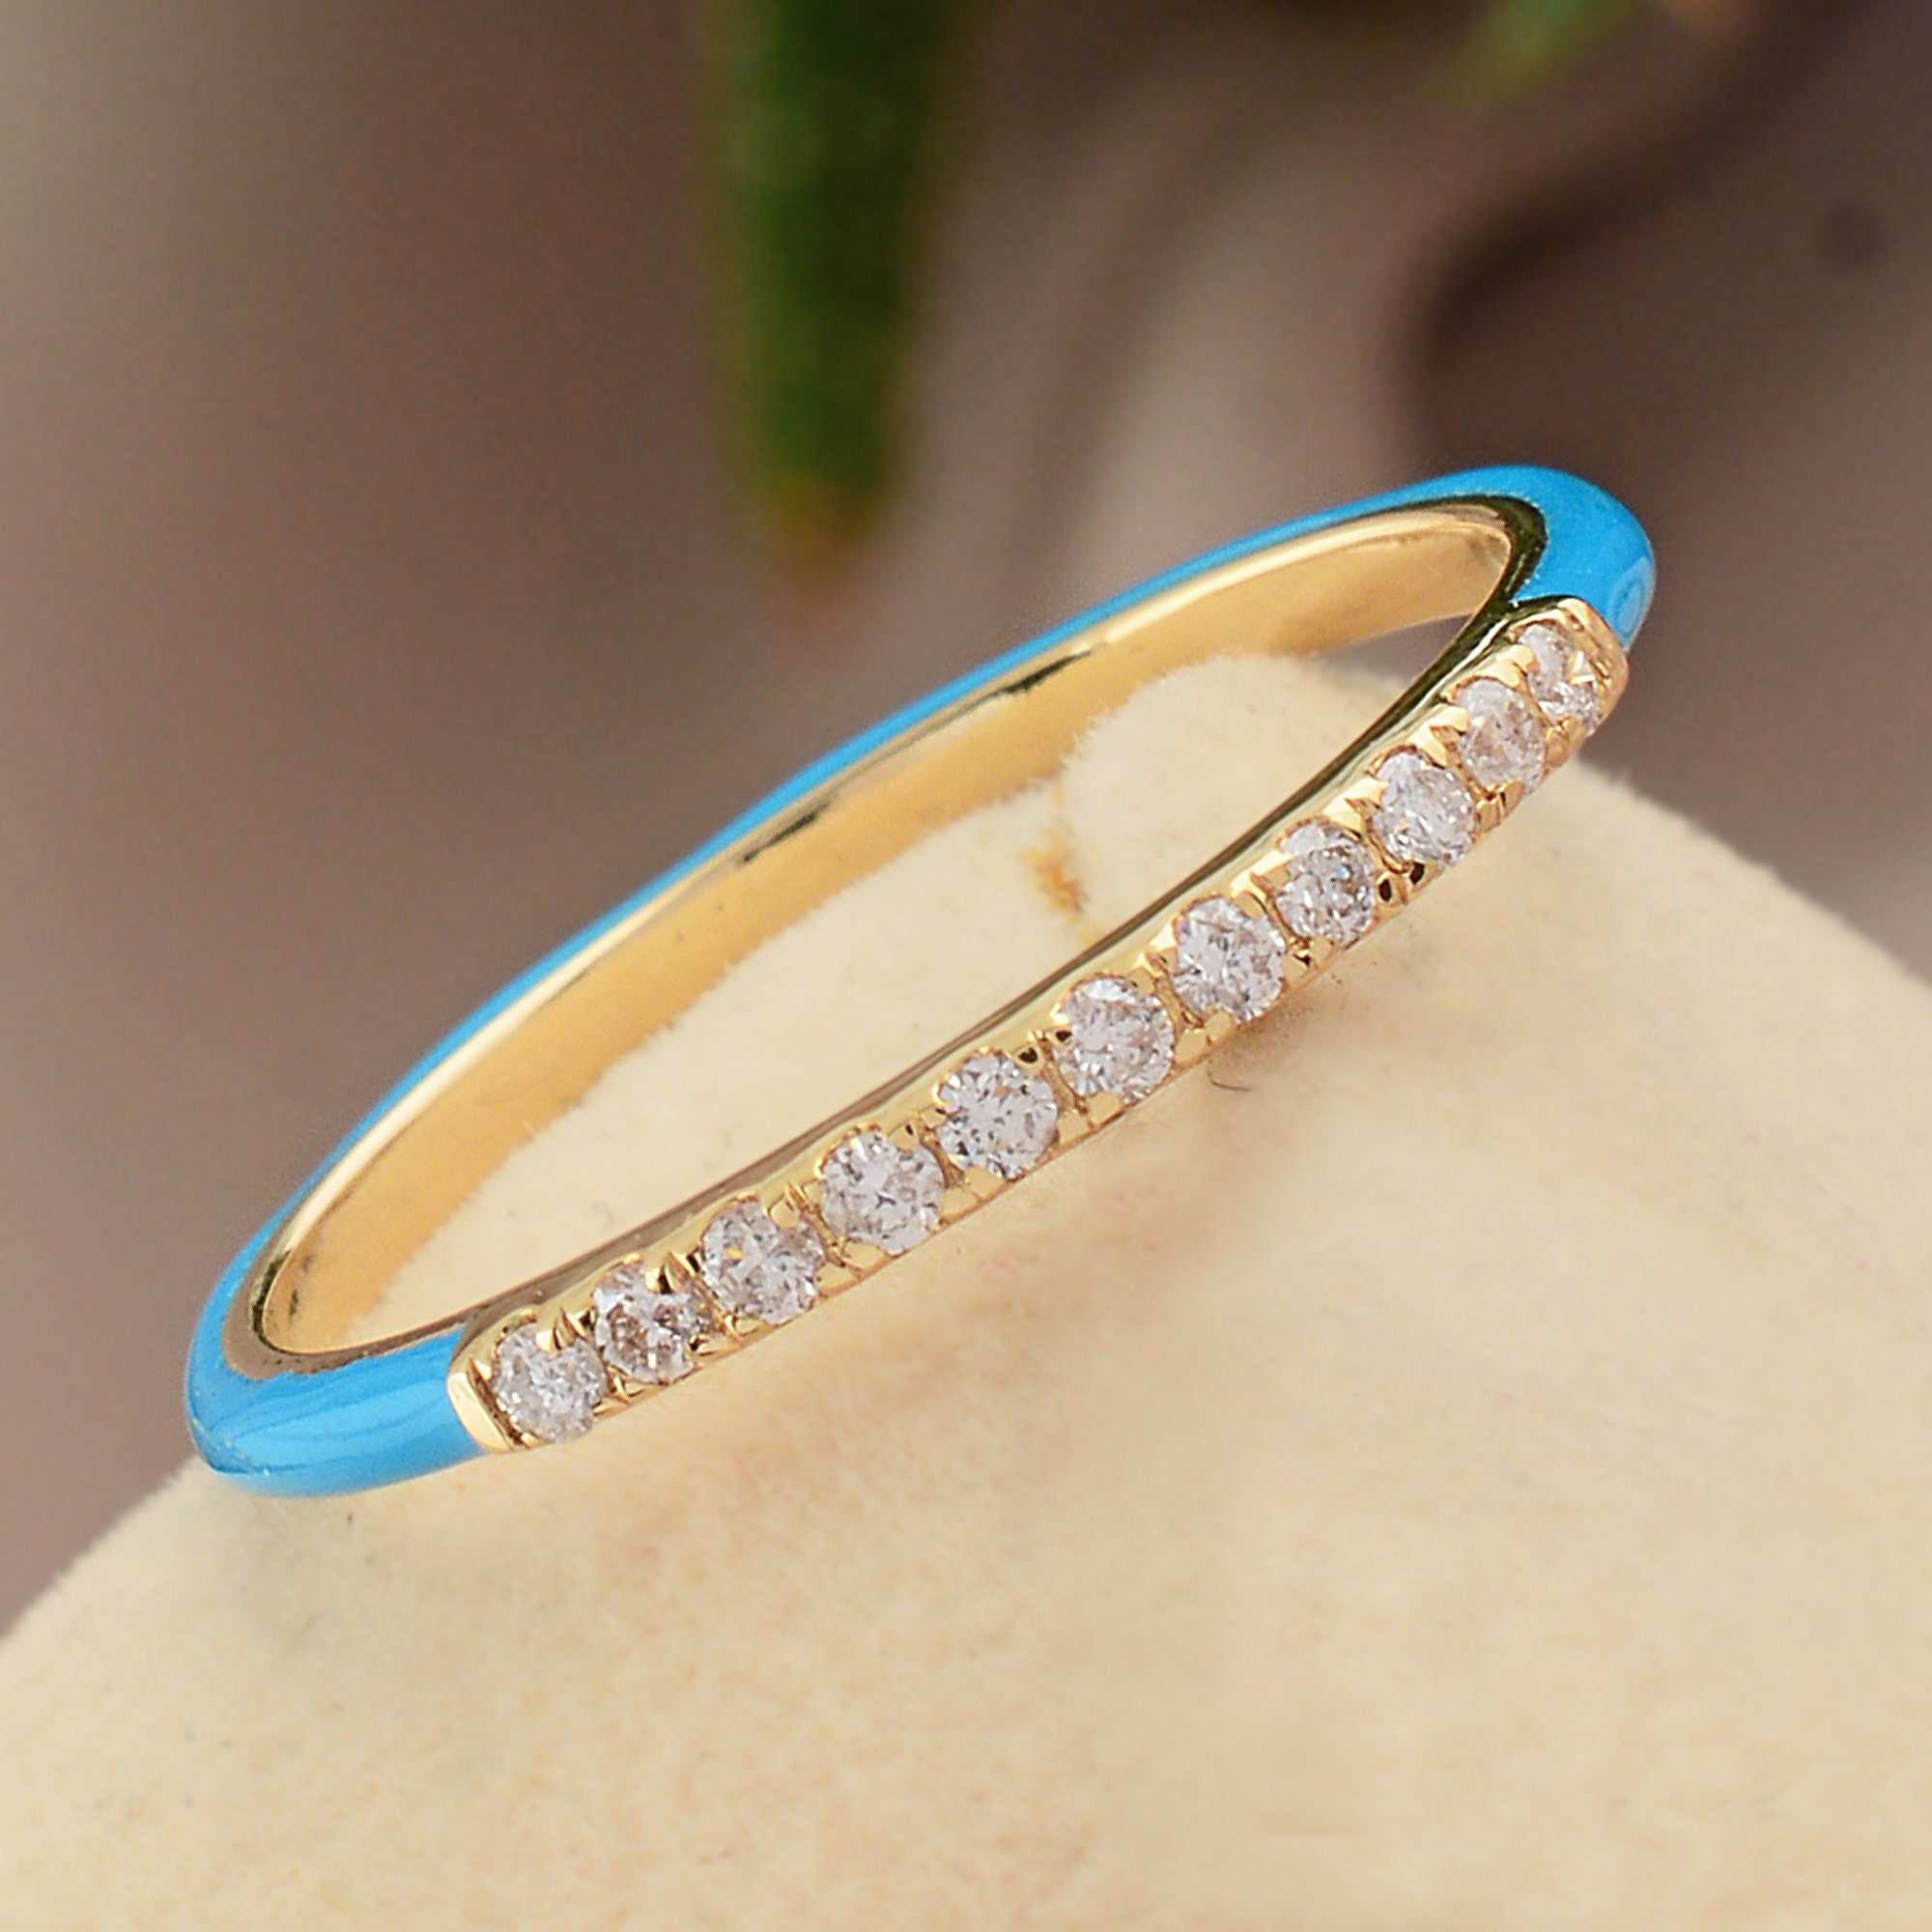 Turquoise Enamel Ring, Minimal 14K Solid Gold Dainty Diamond Simple Small Stacked Ring